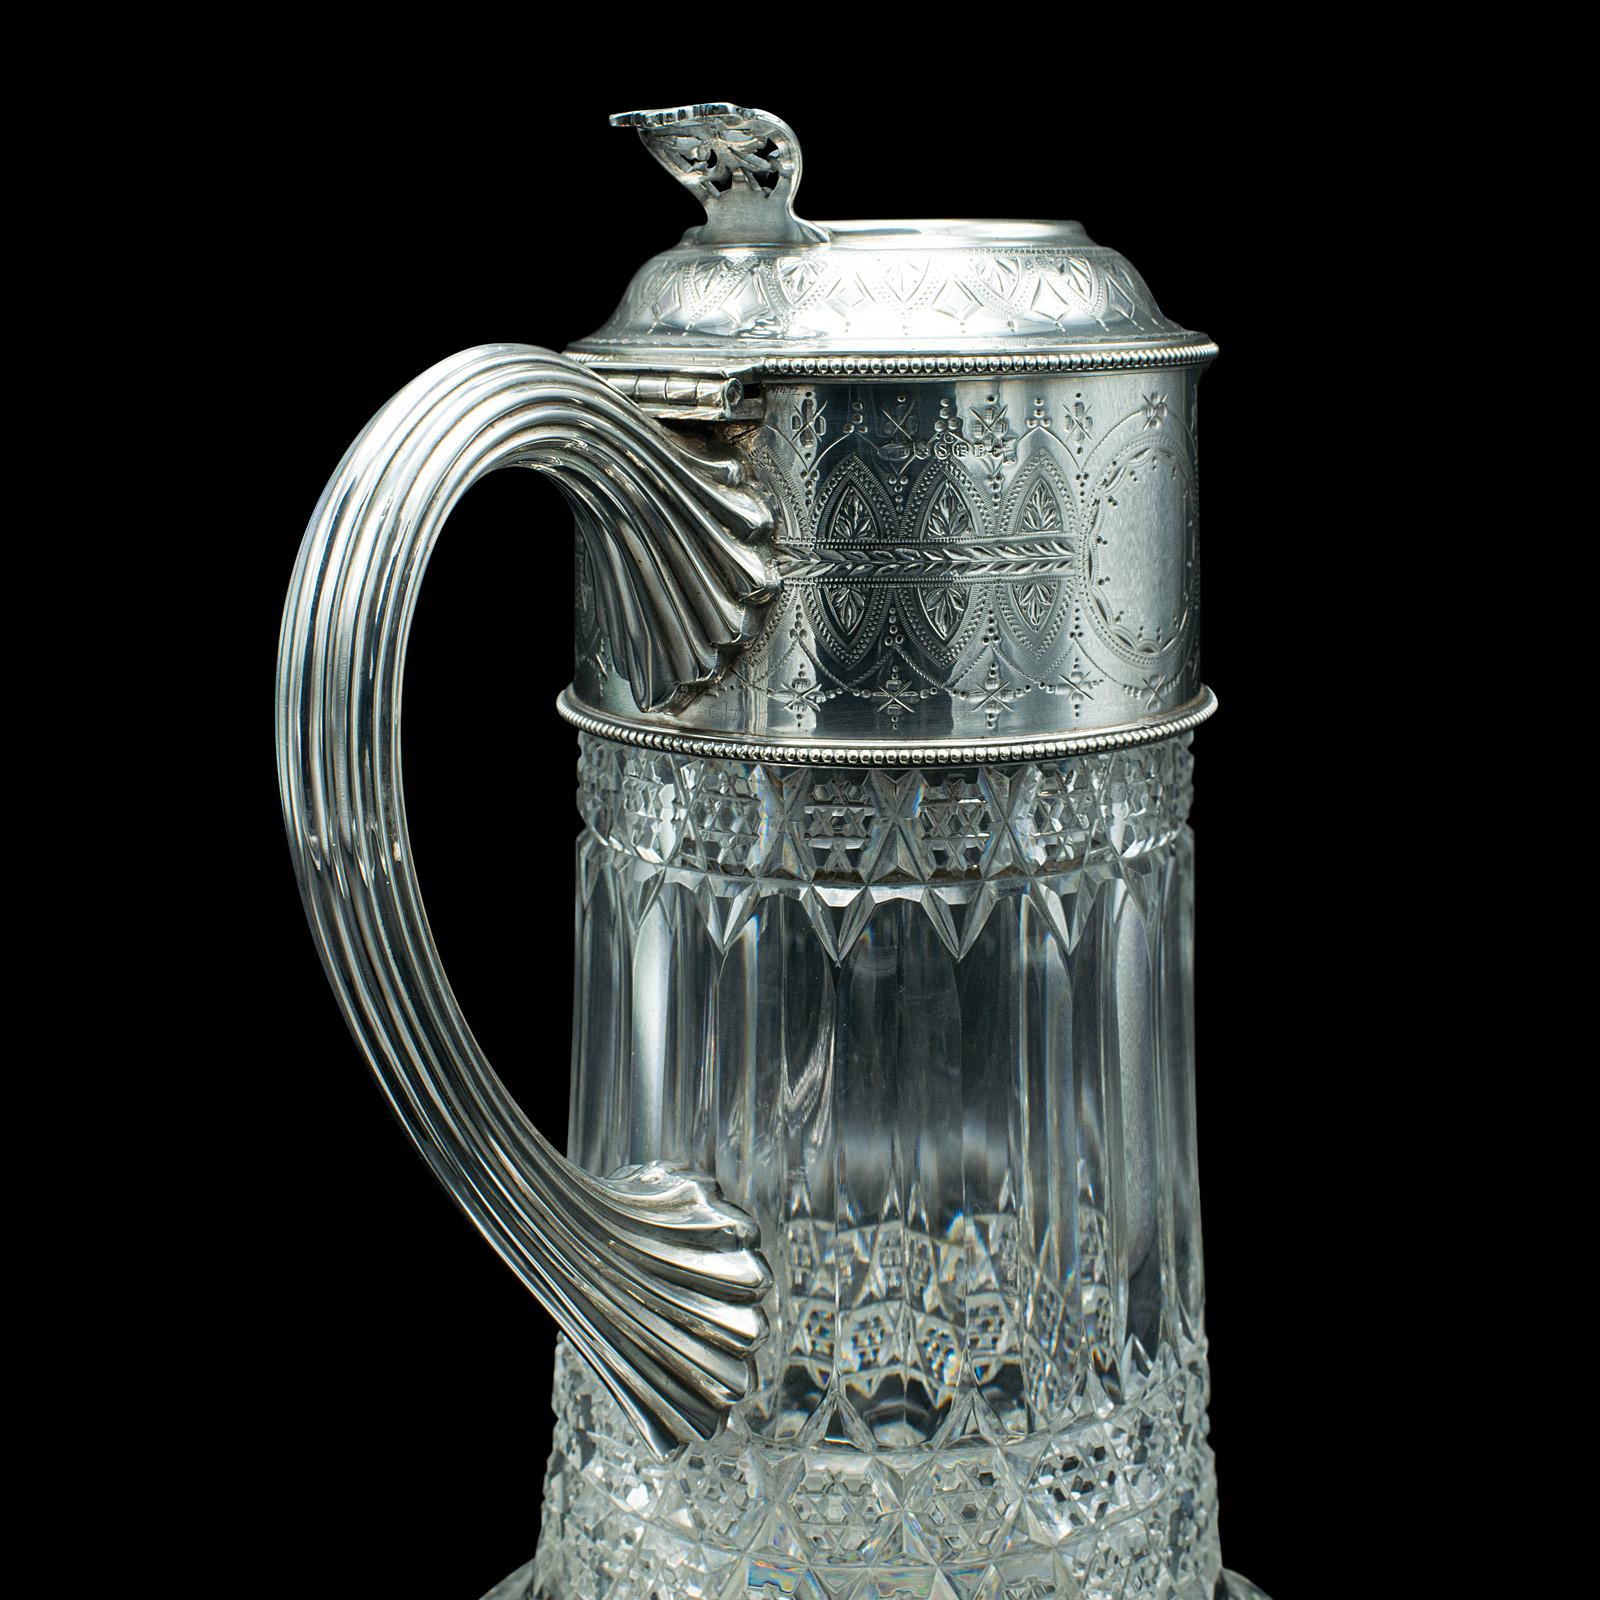 Antique Claret Jug, English, Cut Glass, Silver Plate, Decanter, Victorian, 1900 For Sale 3